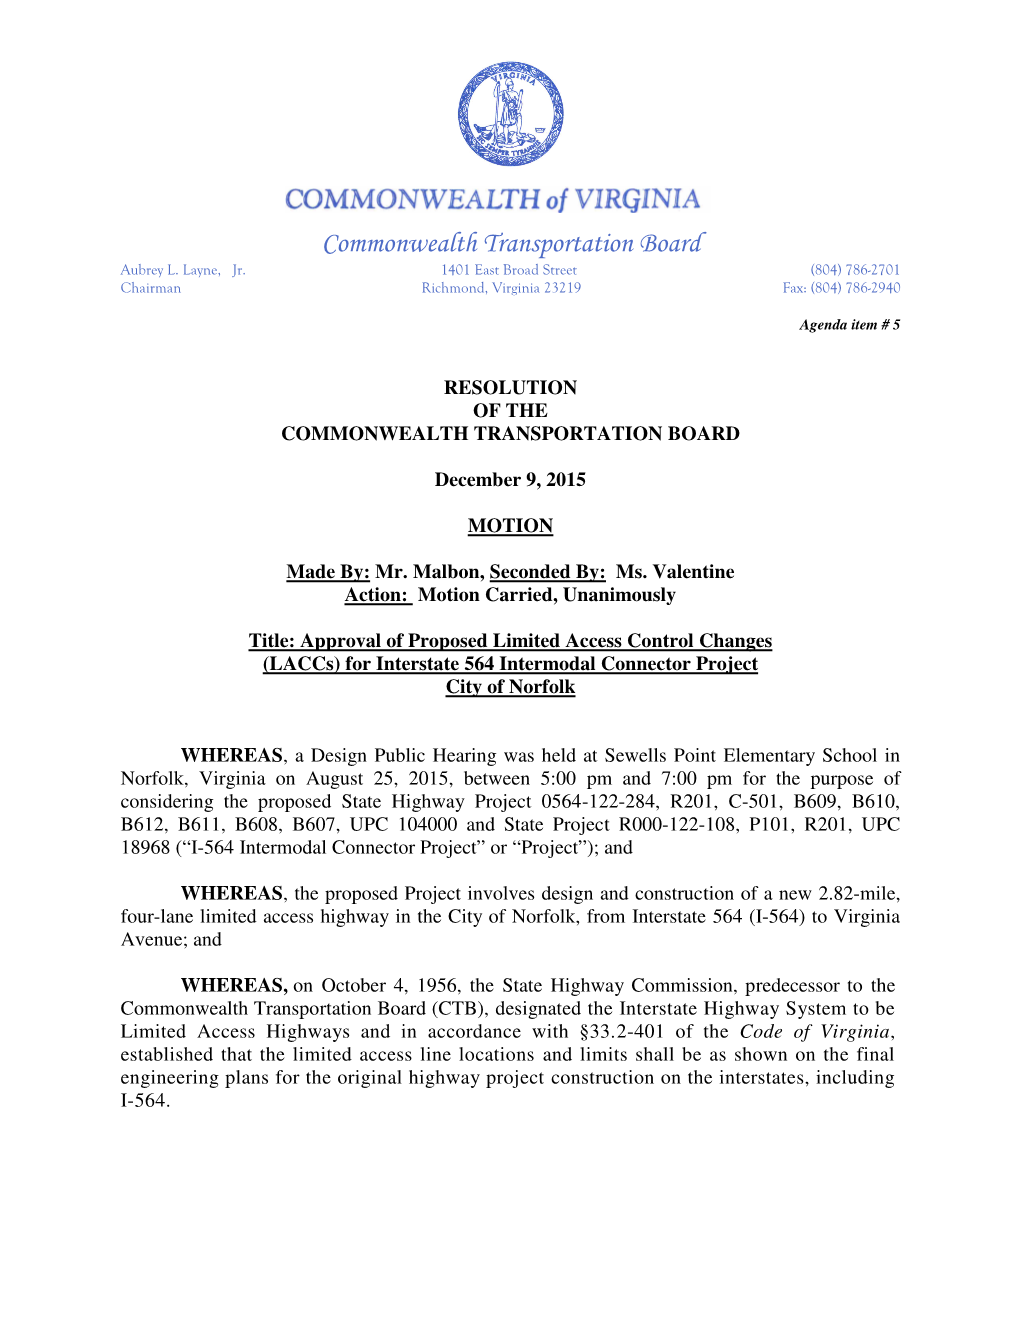 (Laccs) for Interstate 564 Intermodal Connector Project City of Norfolk